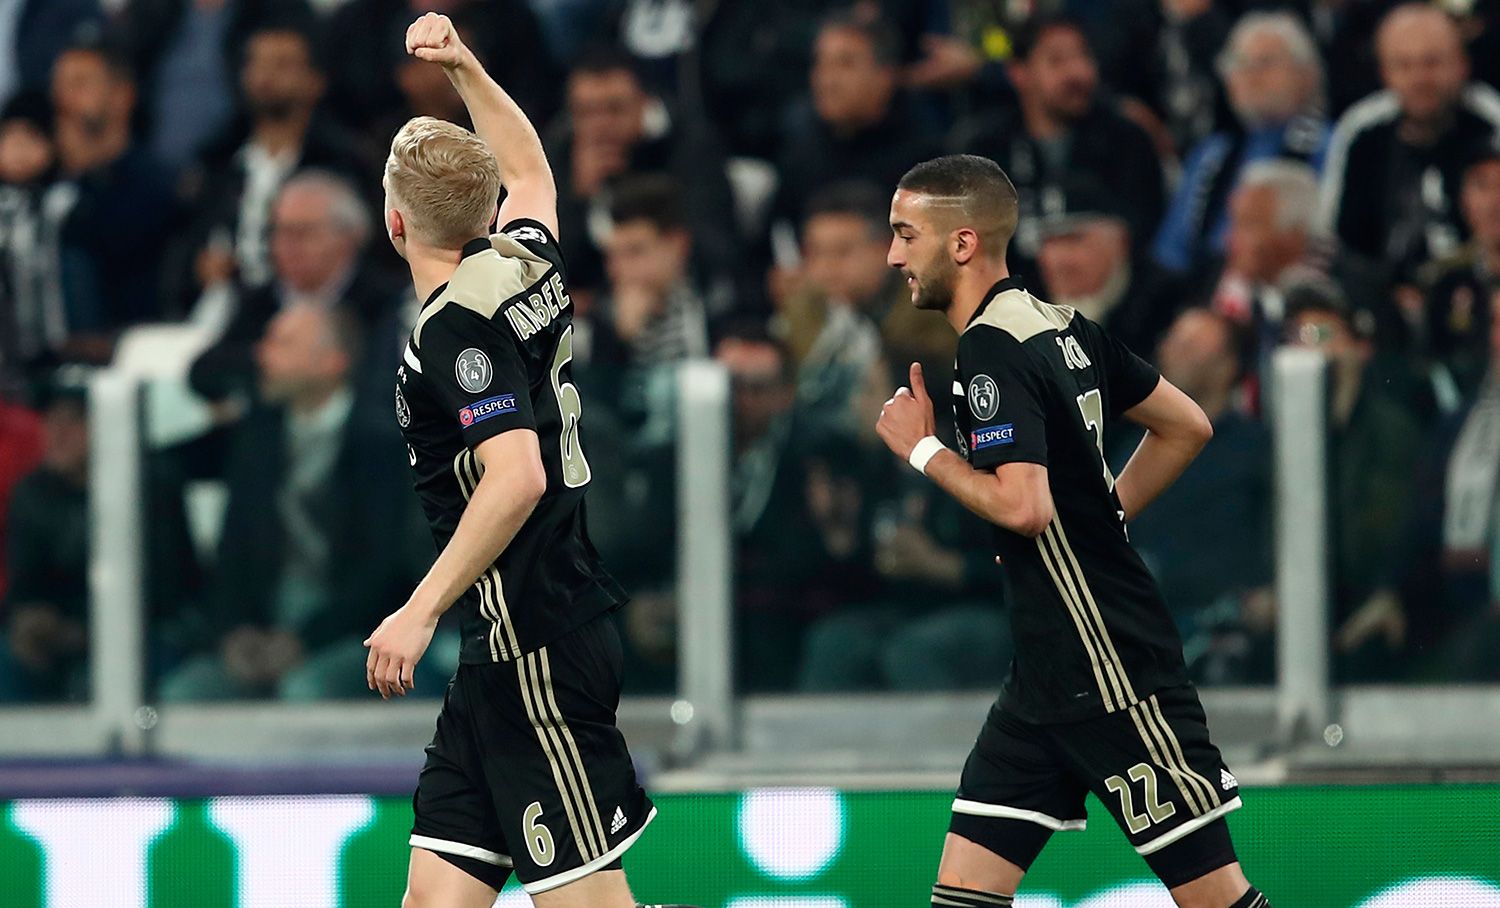 They go of Beek and Ziyech, stars of the Ajax